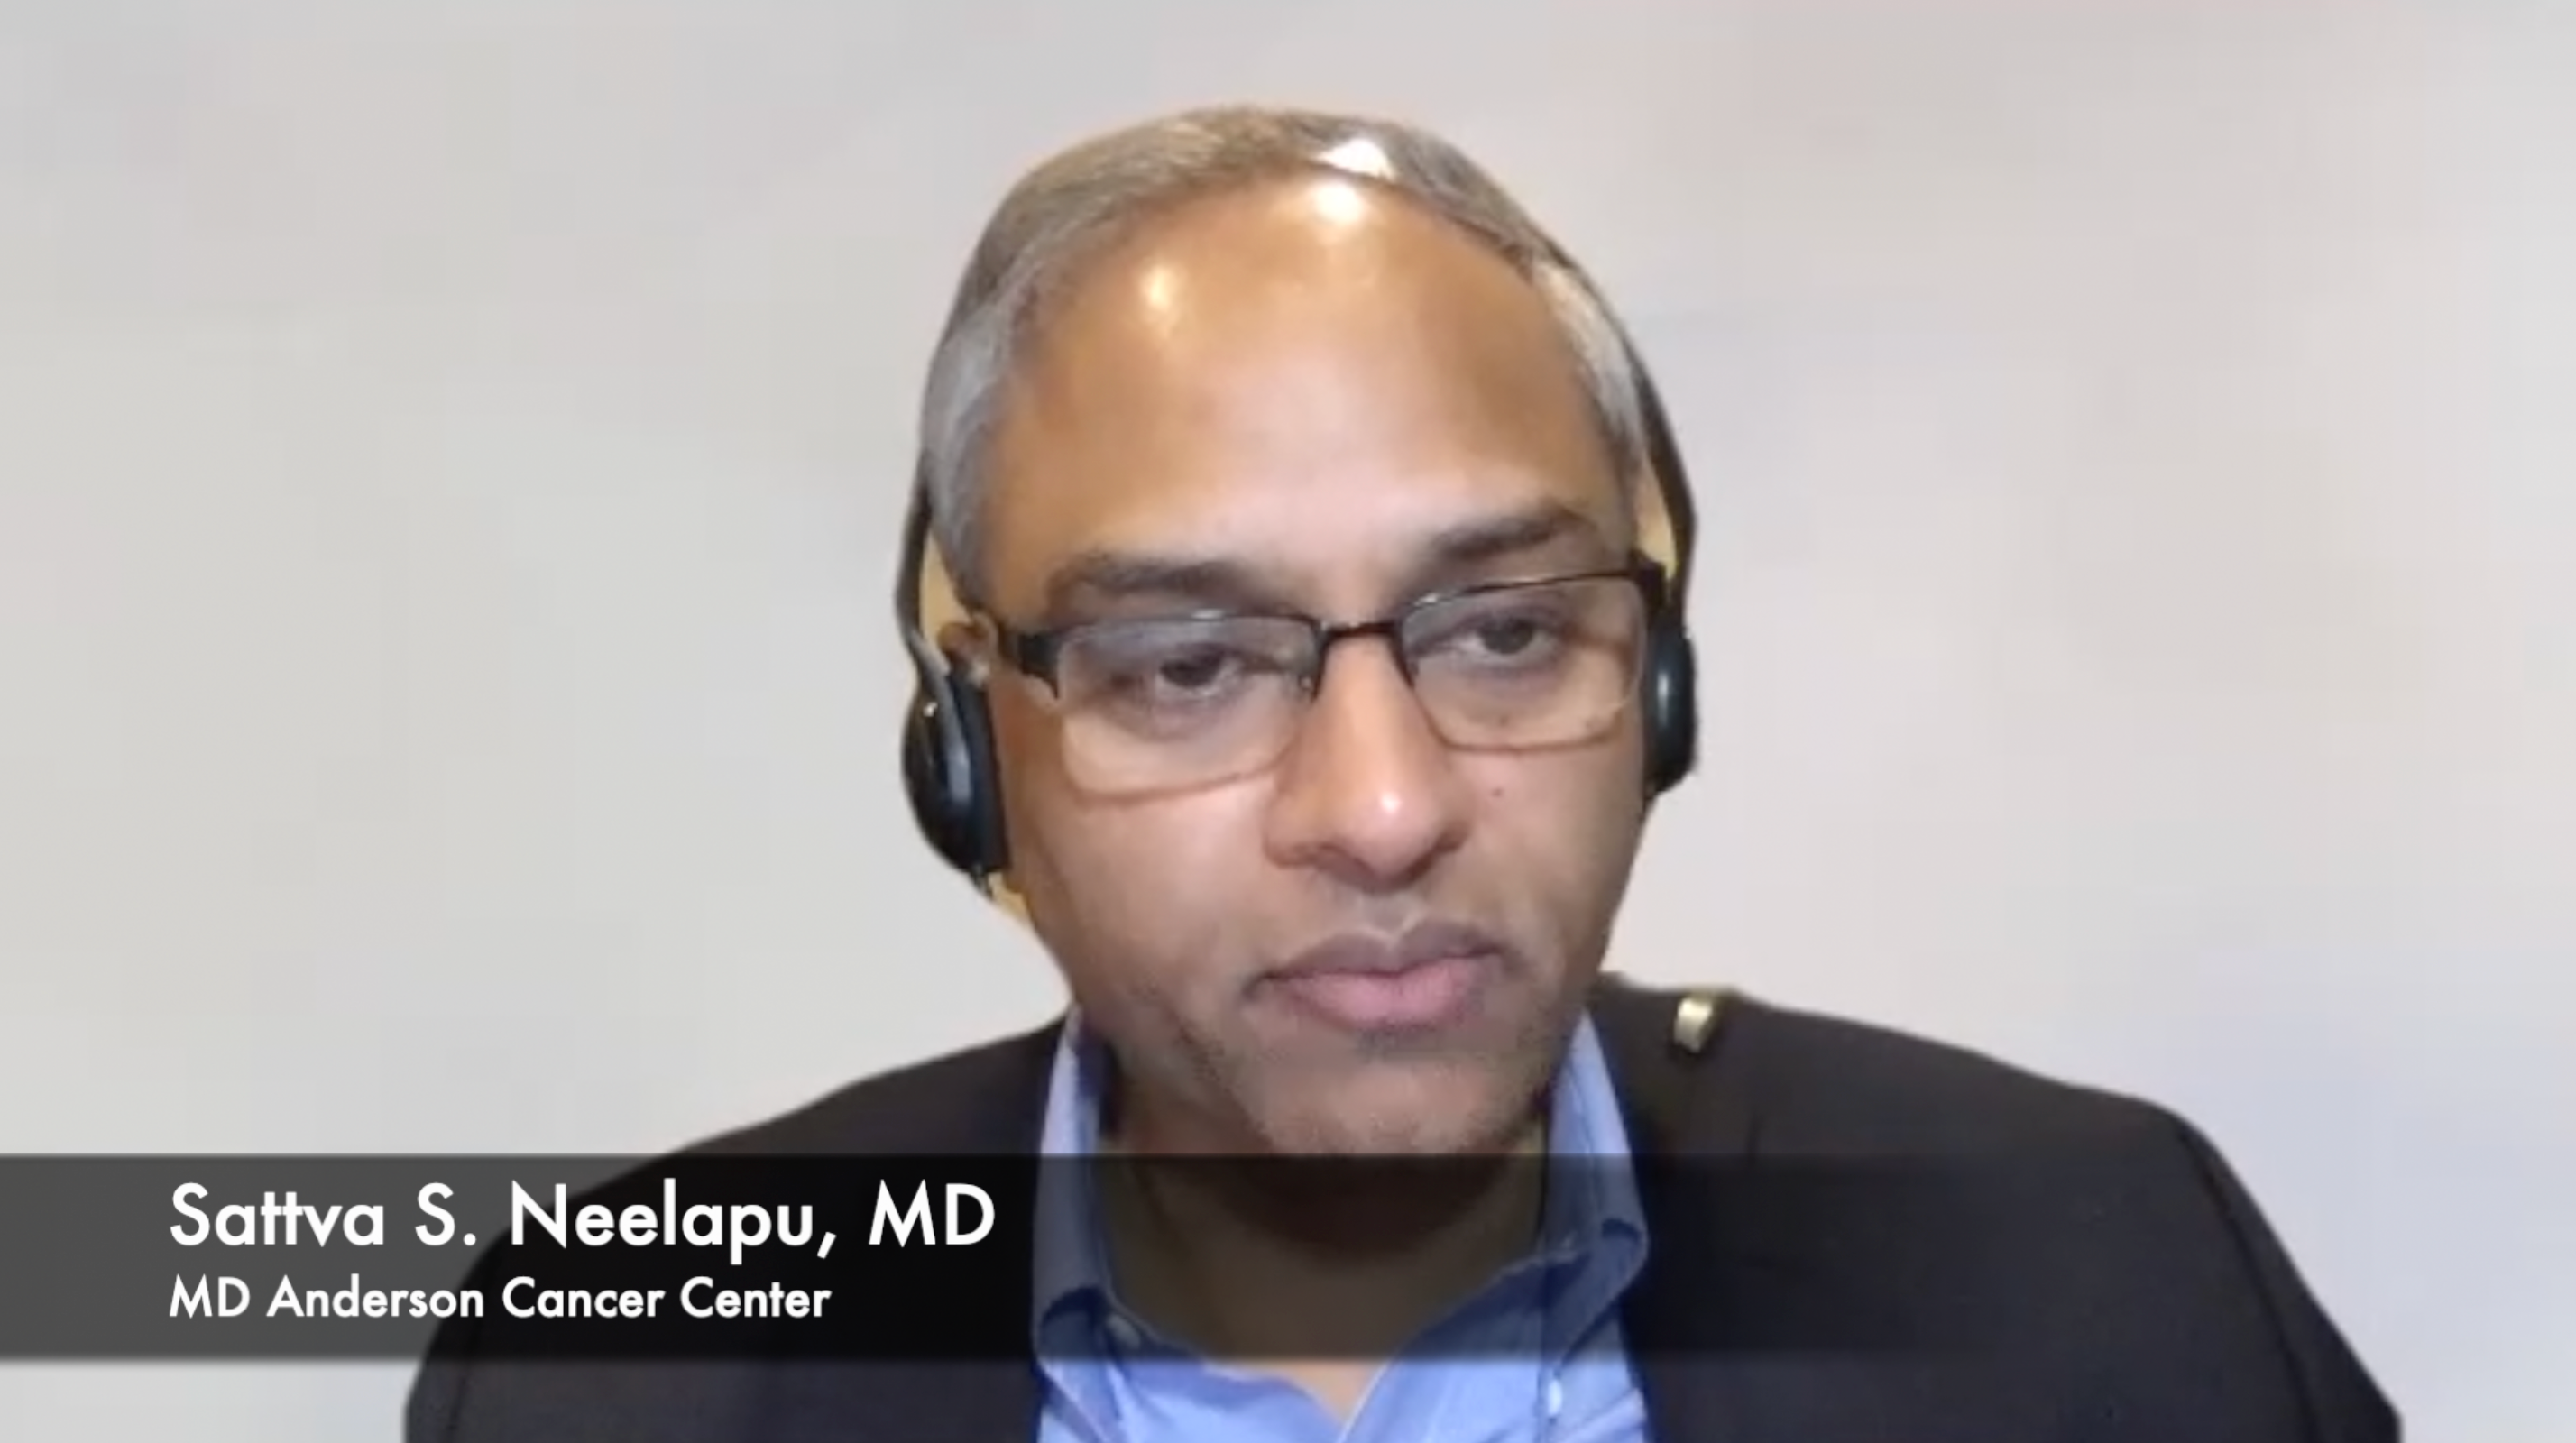 Sattva S. Neelapu, MD, Discusses Further ZUMA-5 Follow-up on Axi-Cel for R/R iNHL